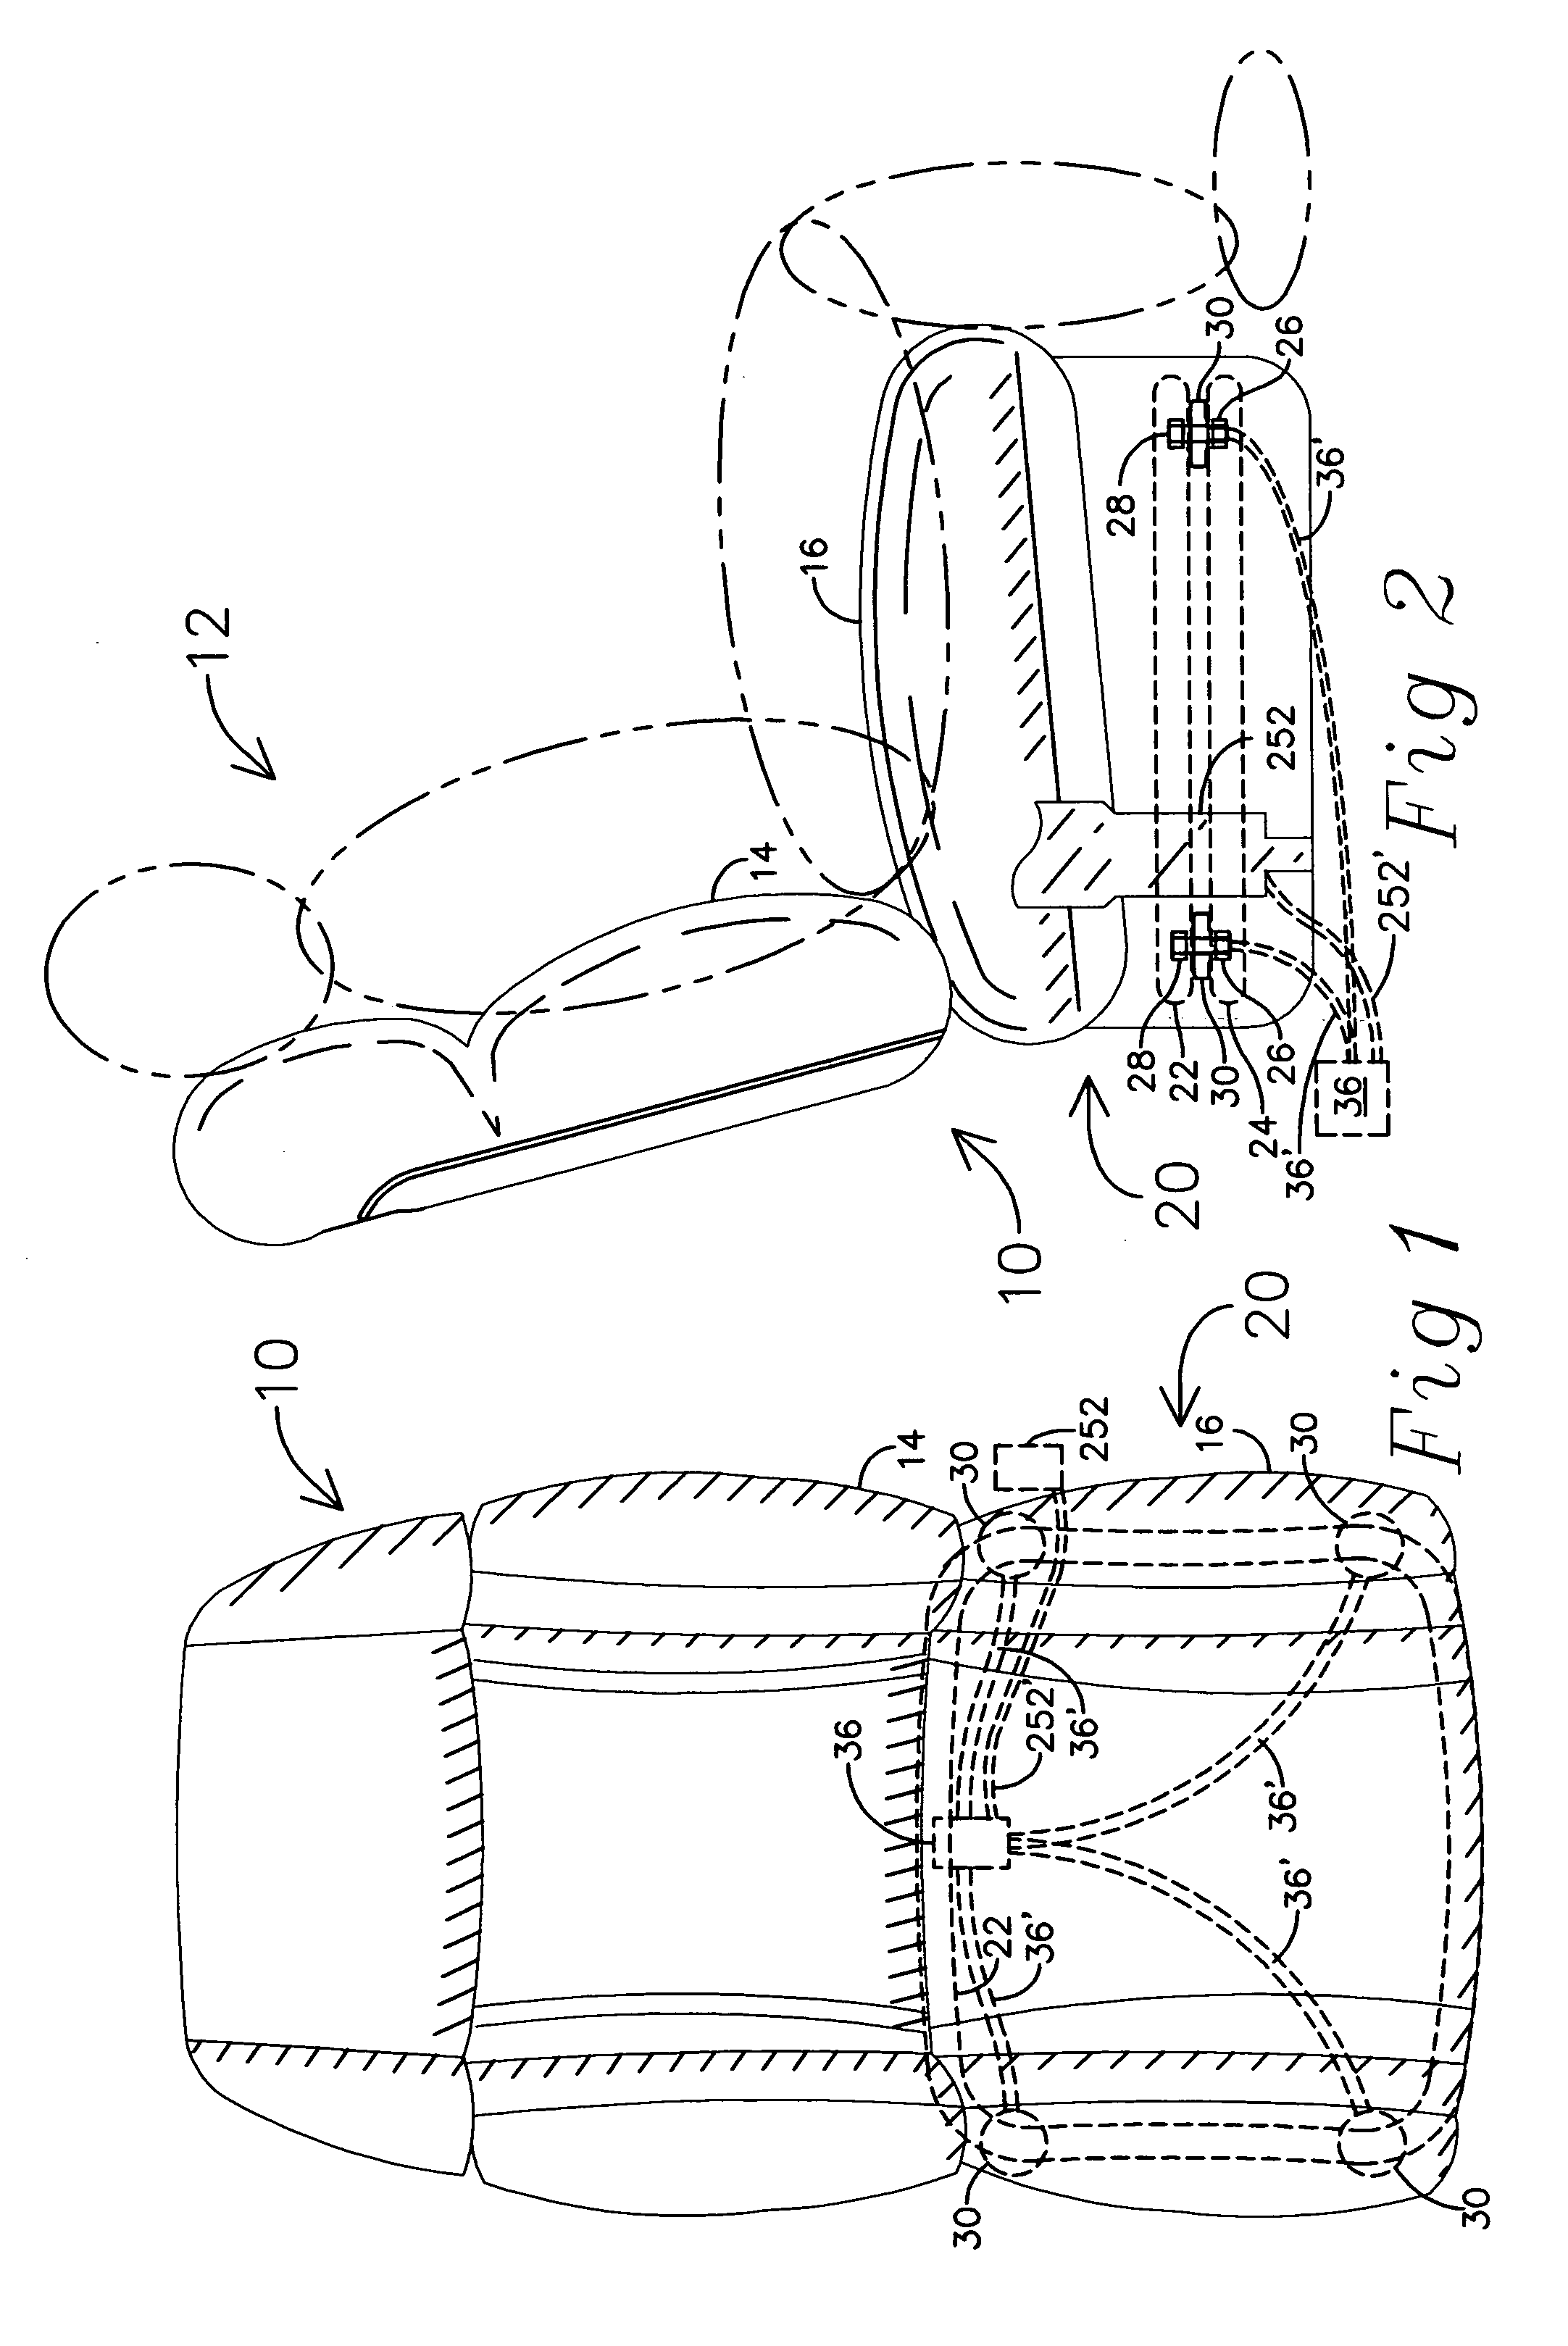 Load cell and seat occupant weight sensing system